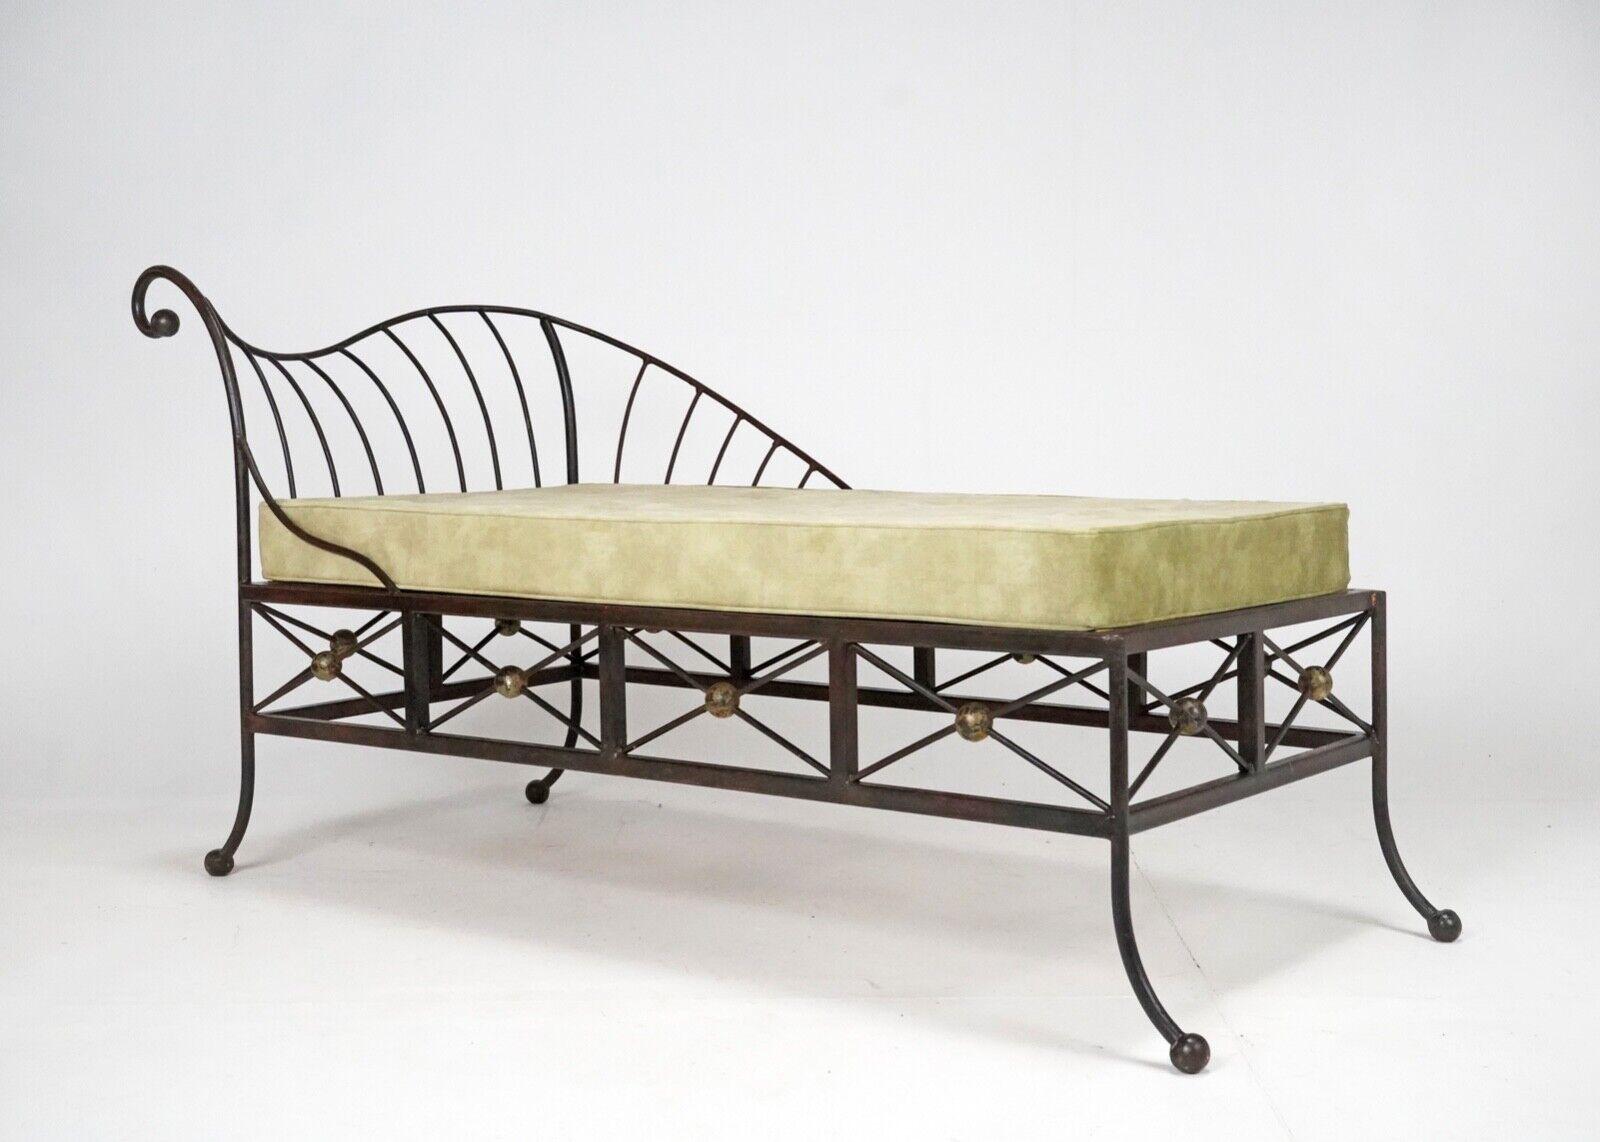 Art déco Vintage French Box Steel Metal Day Bed, Sun Lounger, Chaise Lounge Green Seat